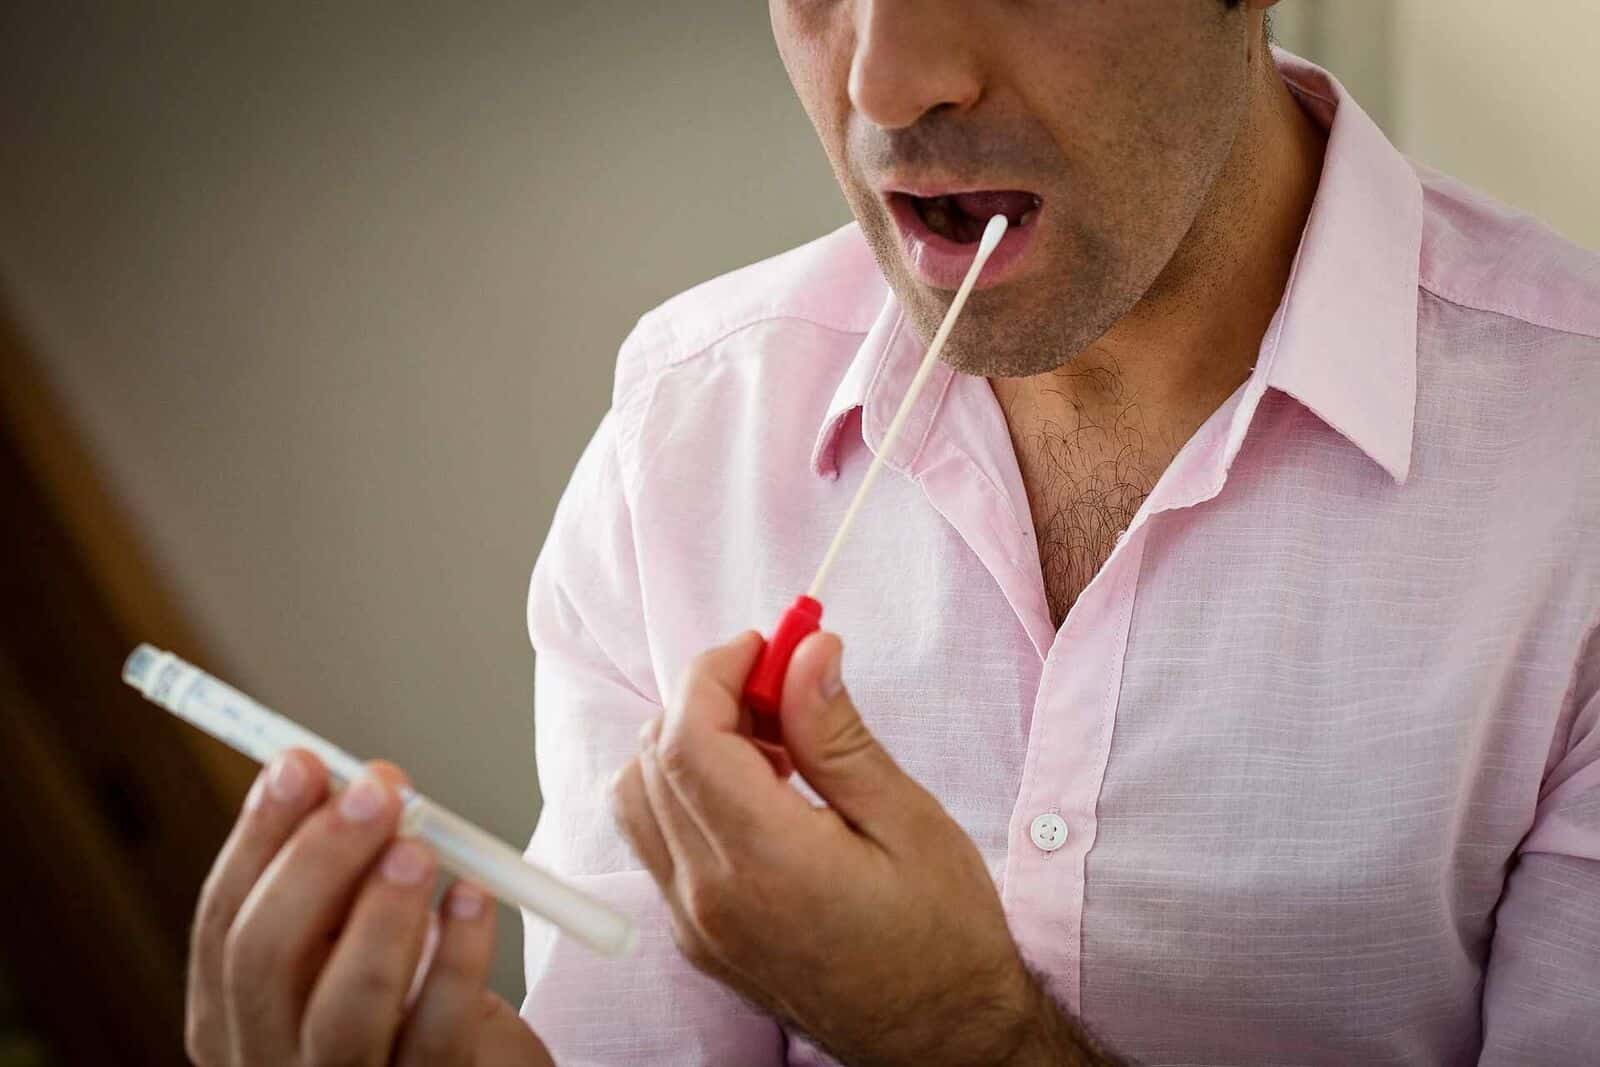 Saliva Test for Hormone Kits: Checking Your Hormones at Home